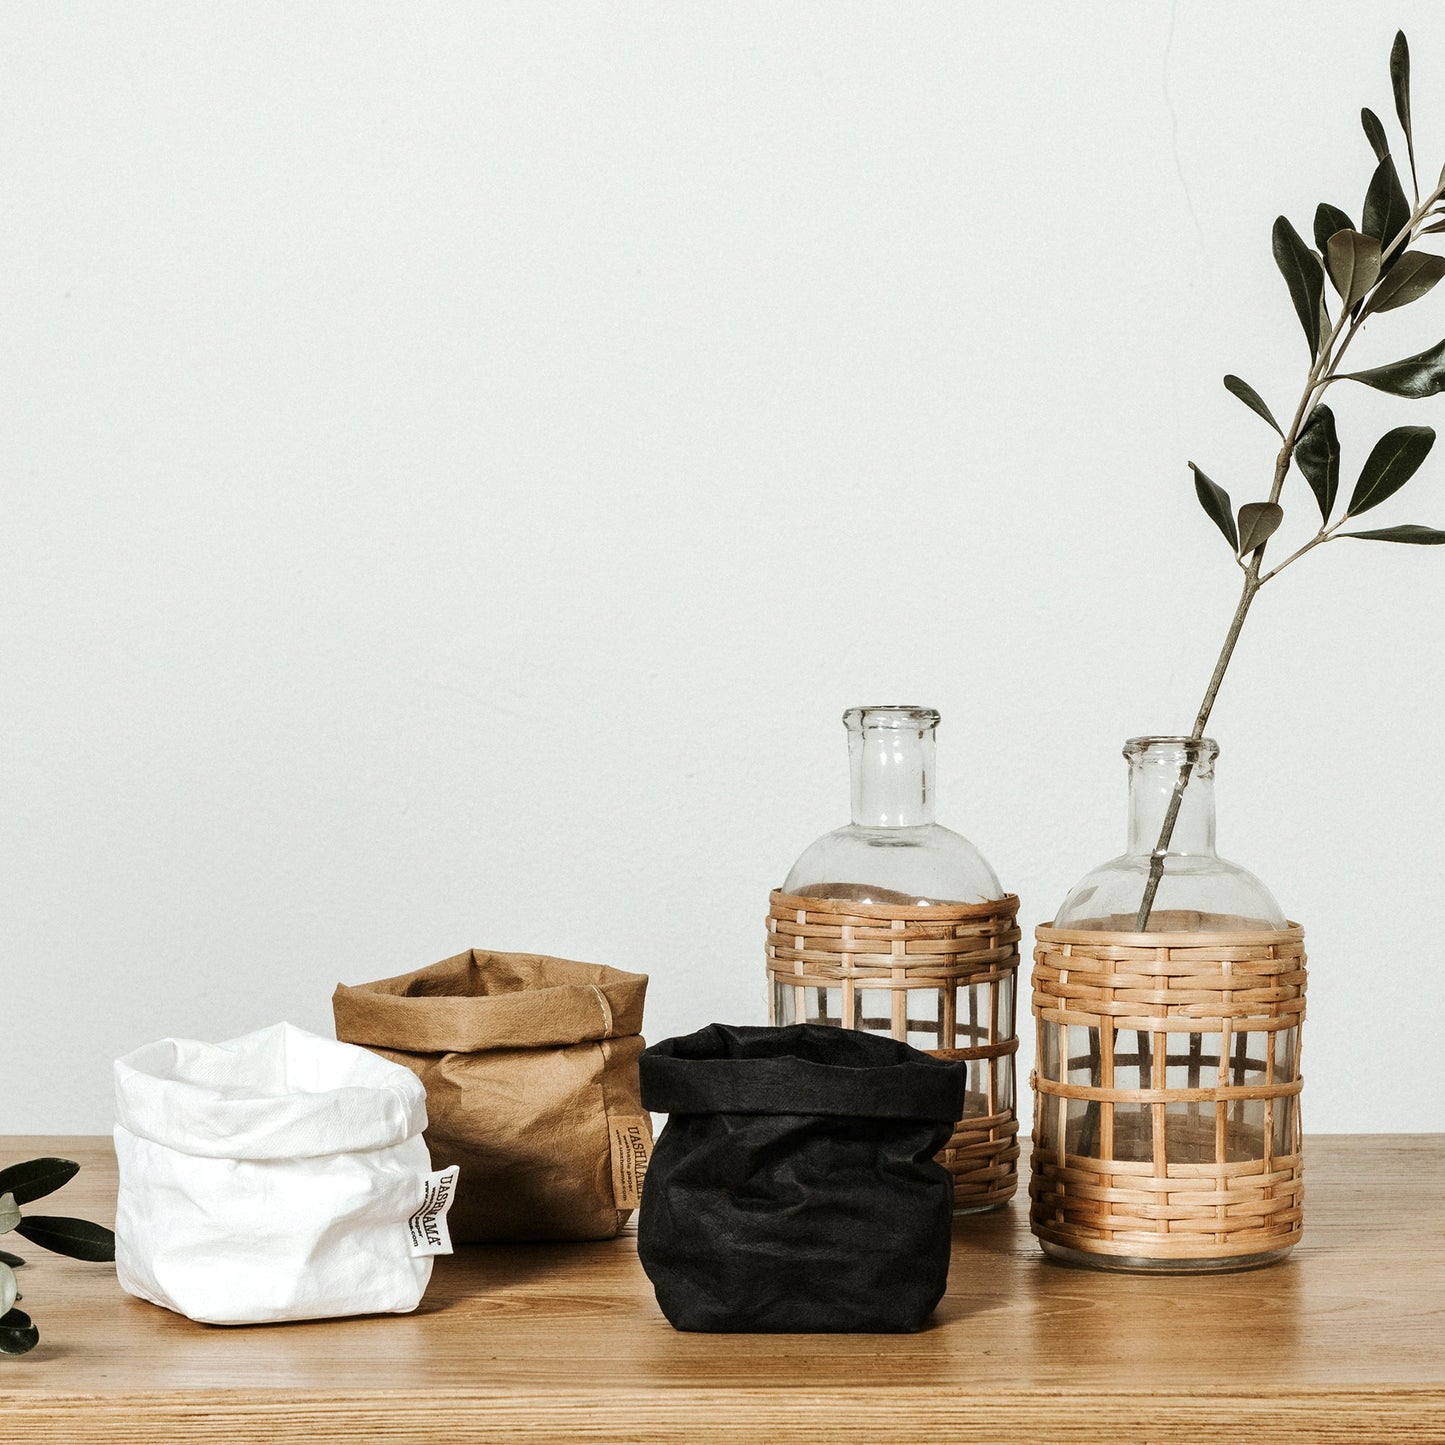 Three piccolo washable paper bags are shown. From left to right they are white, tan and black in colour and are all empty. Next to the black bag on the left are two glass vases with raffia. A tall green stem is in the vase on the right.